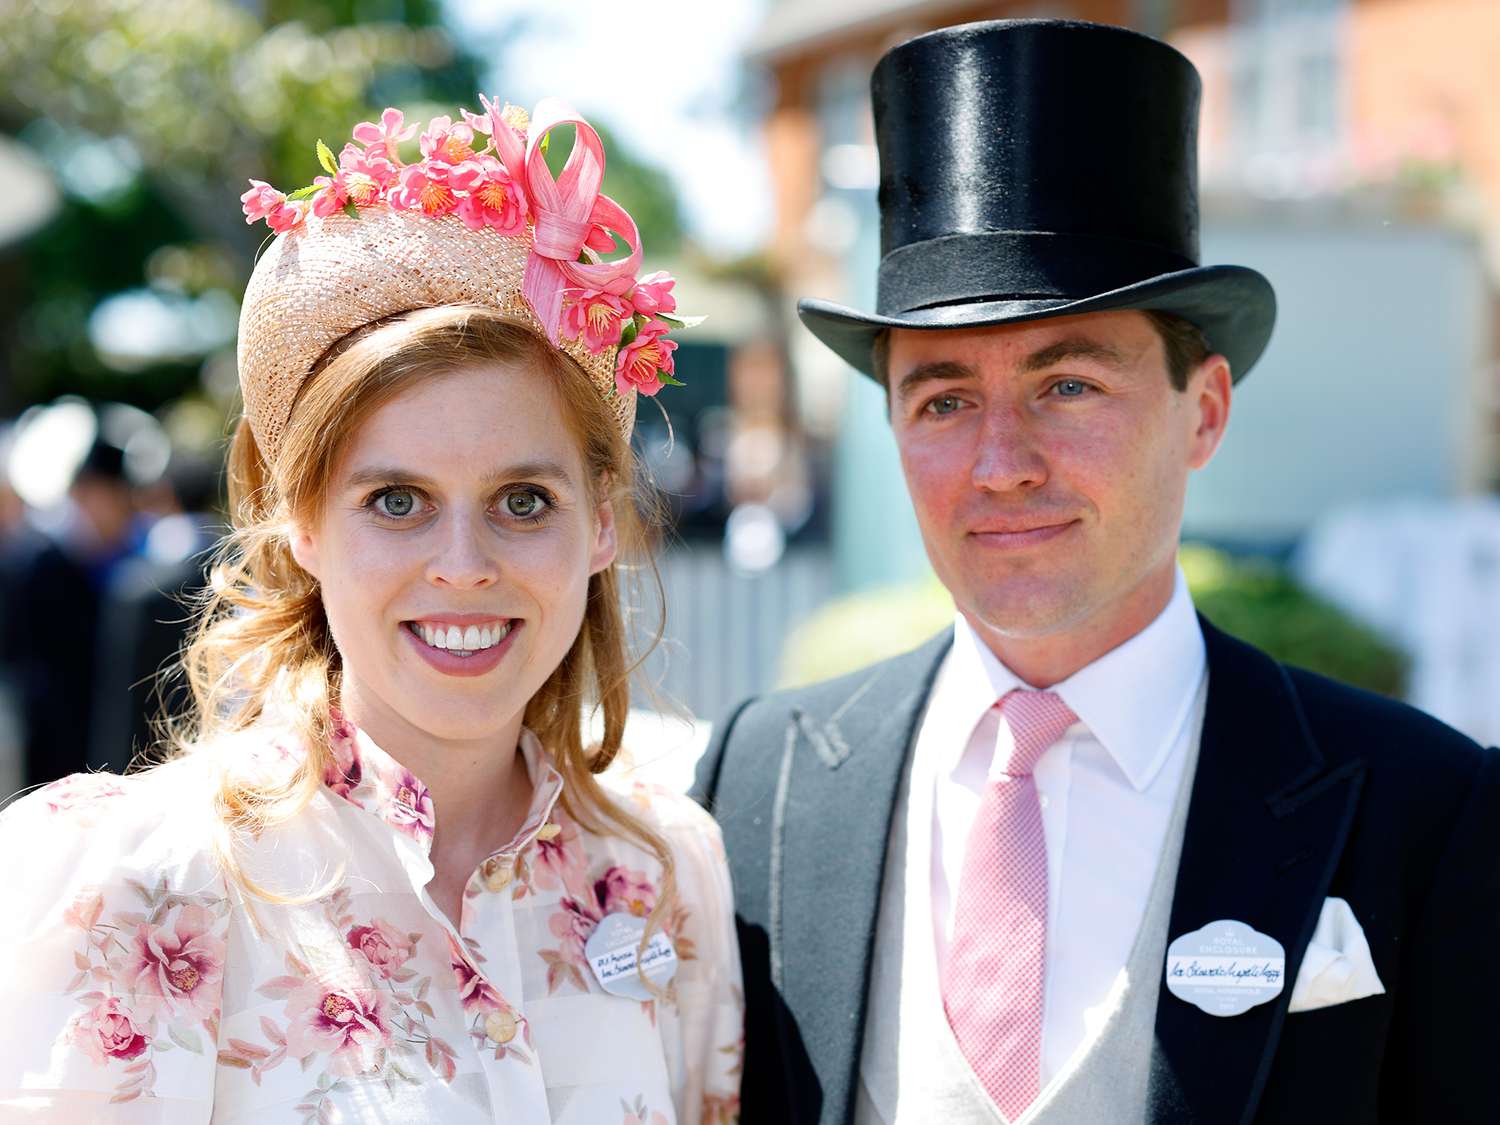 Princess Beatrice and Edoardo Mapelli Mozzi attend day 1 of Royal Ascot at Ascot Racecourse on June 14, 2022 in Ascot, England